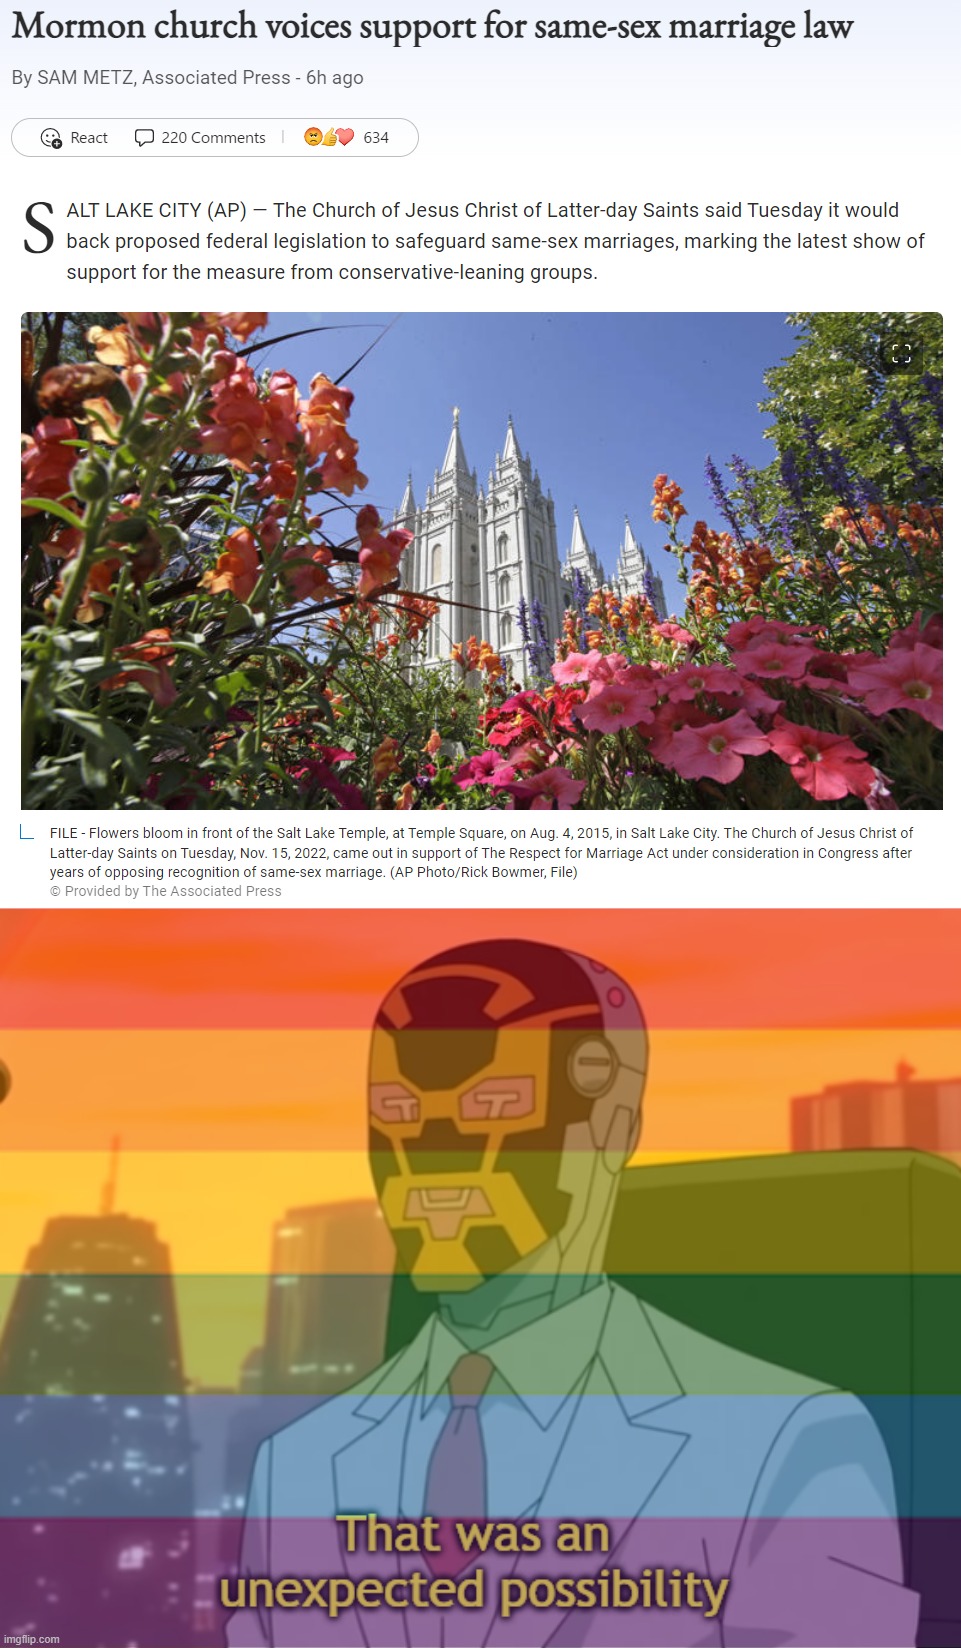 Not bad, Mormon church | image tagged in mormon church voices support for same-sex marriage law,that was an unexpected possibility,mormons,lgbtq,gay rights,unexpected | made w/ Imgflip meme maker